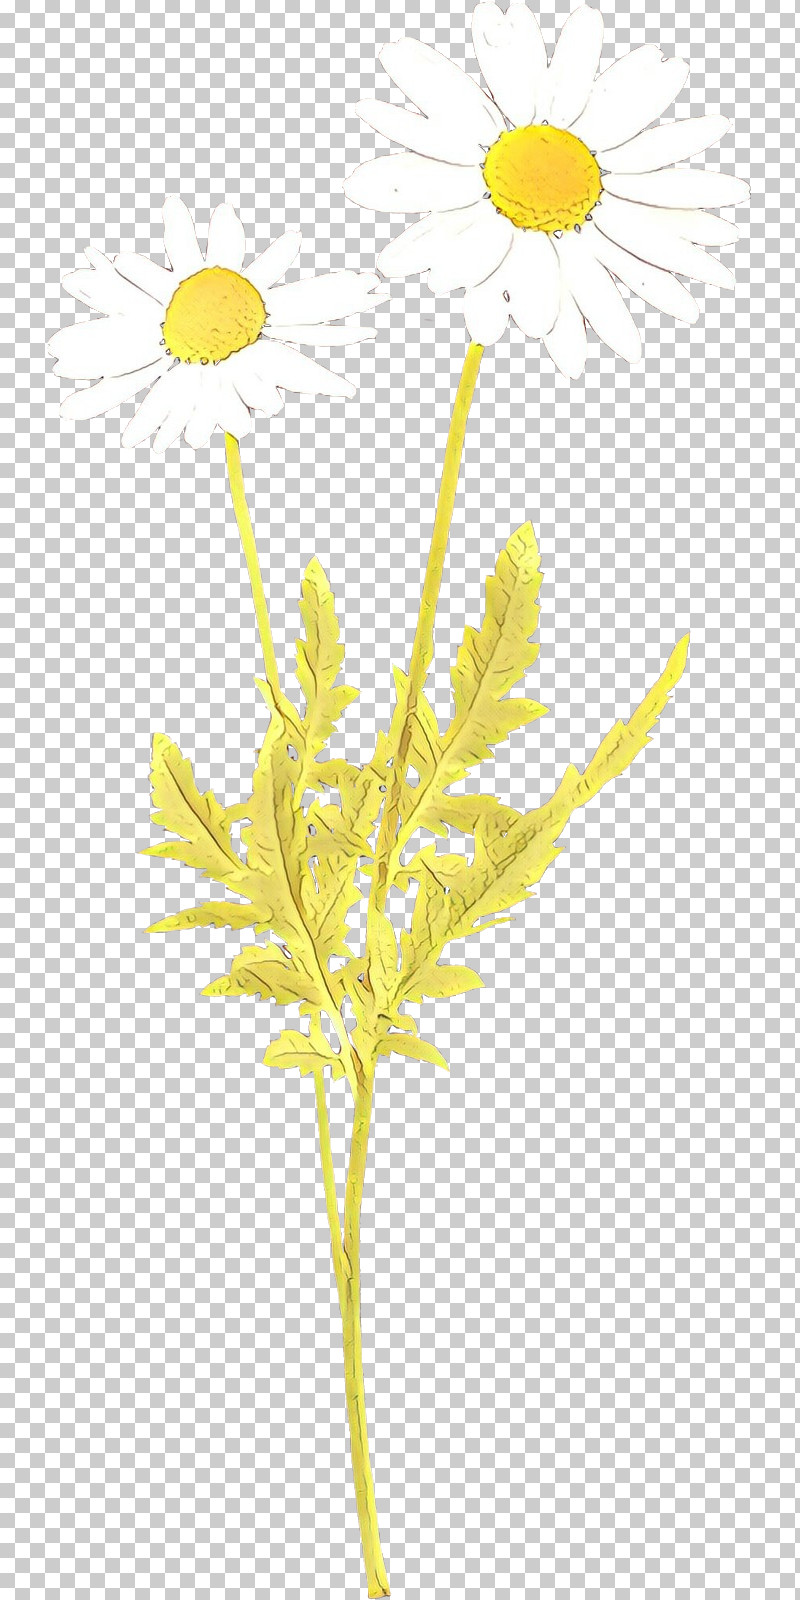 Yellow Plant Flower Leaf Pedicel PNG, Clipart, Flower, Goldenrod, Leaf, Pedicel, Plant Free PNG Download